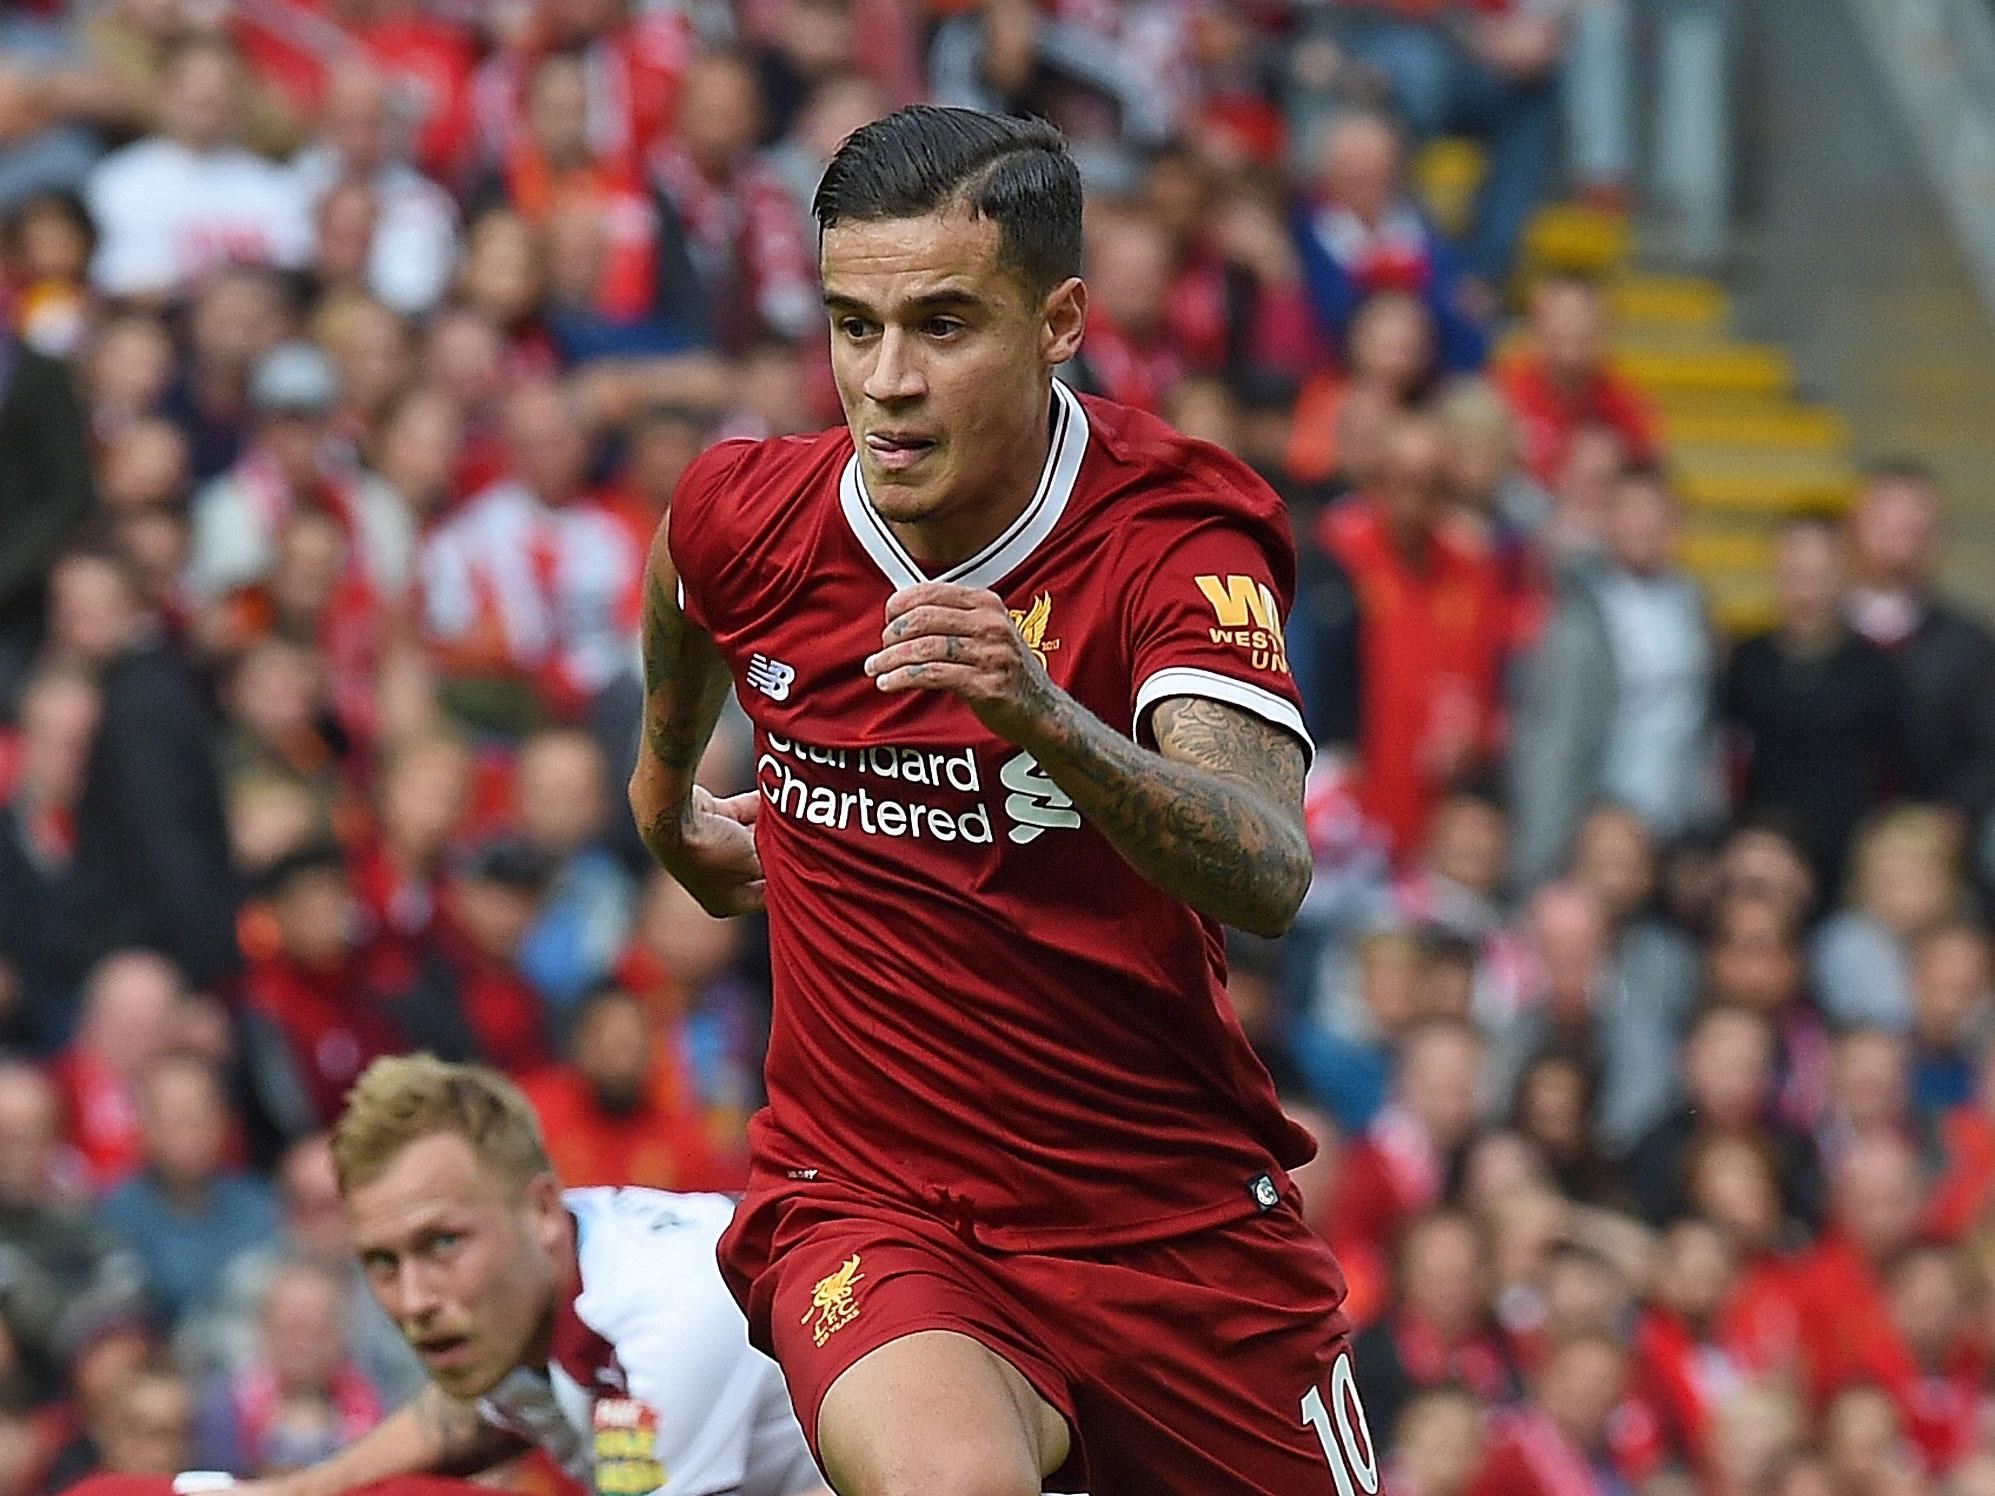 Coutinho is likely to stay until at least the end of the season